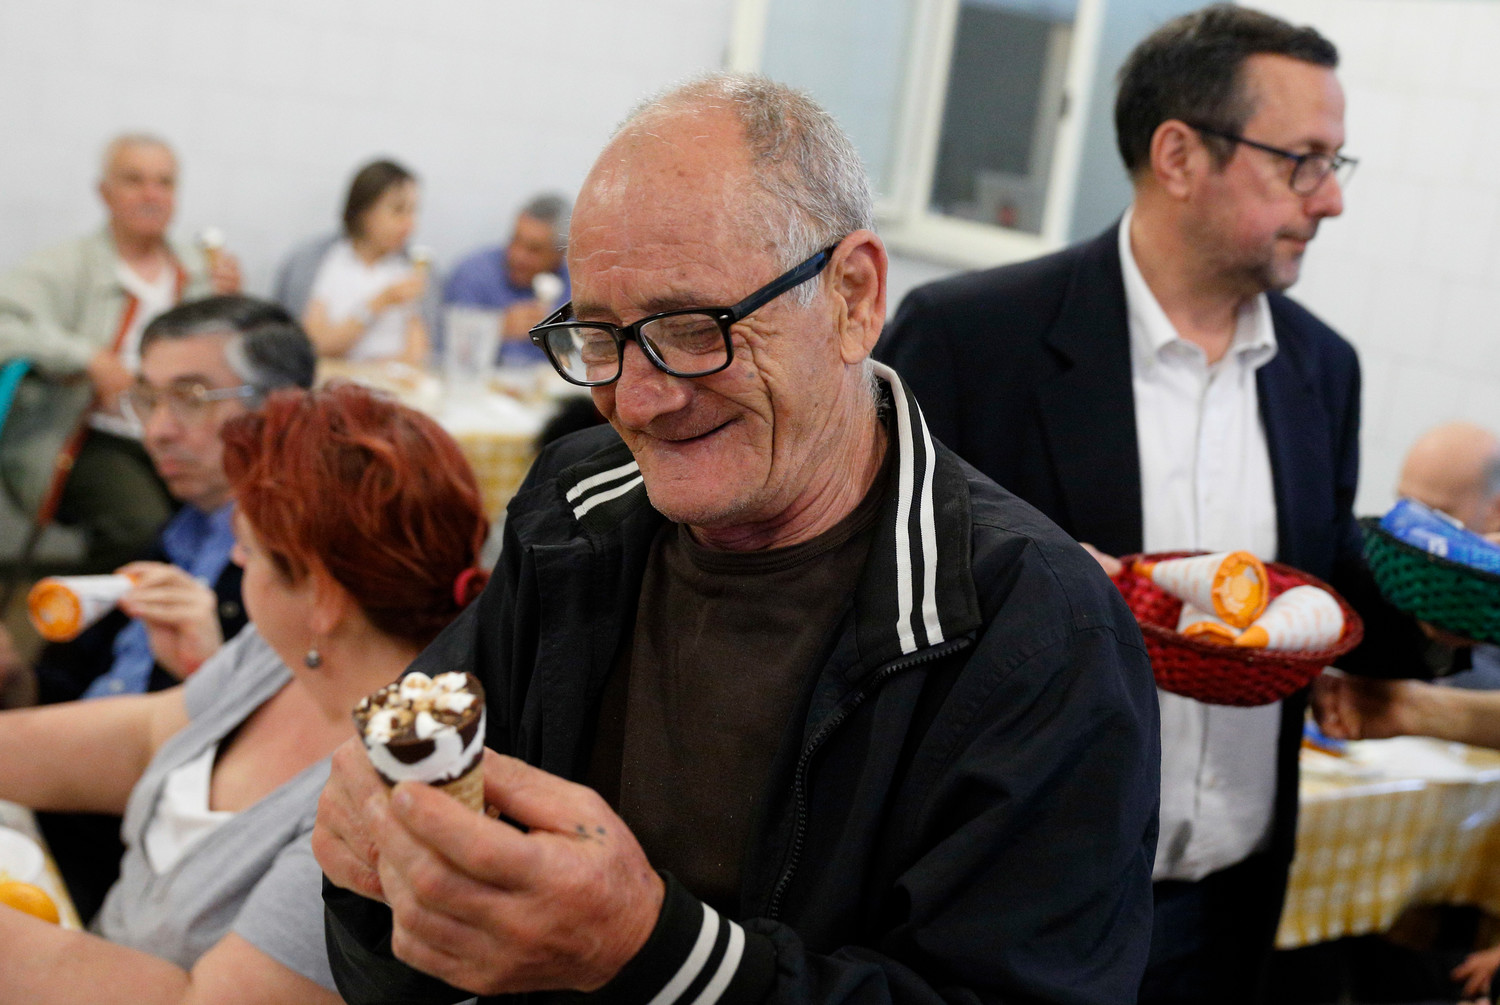 A man enjoys his ice cream cone donated by Pope Francis at a Sant’Egidio soup kitchen in Rome April 23. In honor of his name day, the feast of St. George, the Pope donated 3,000 servings of ice cream to soup kitchens and homeless shelters around Rome.